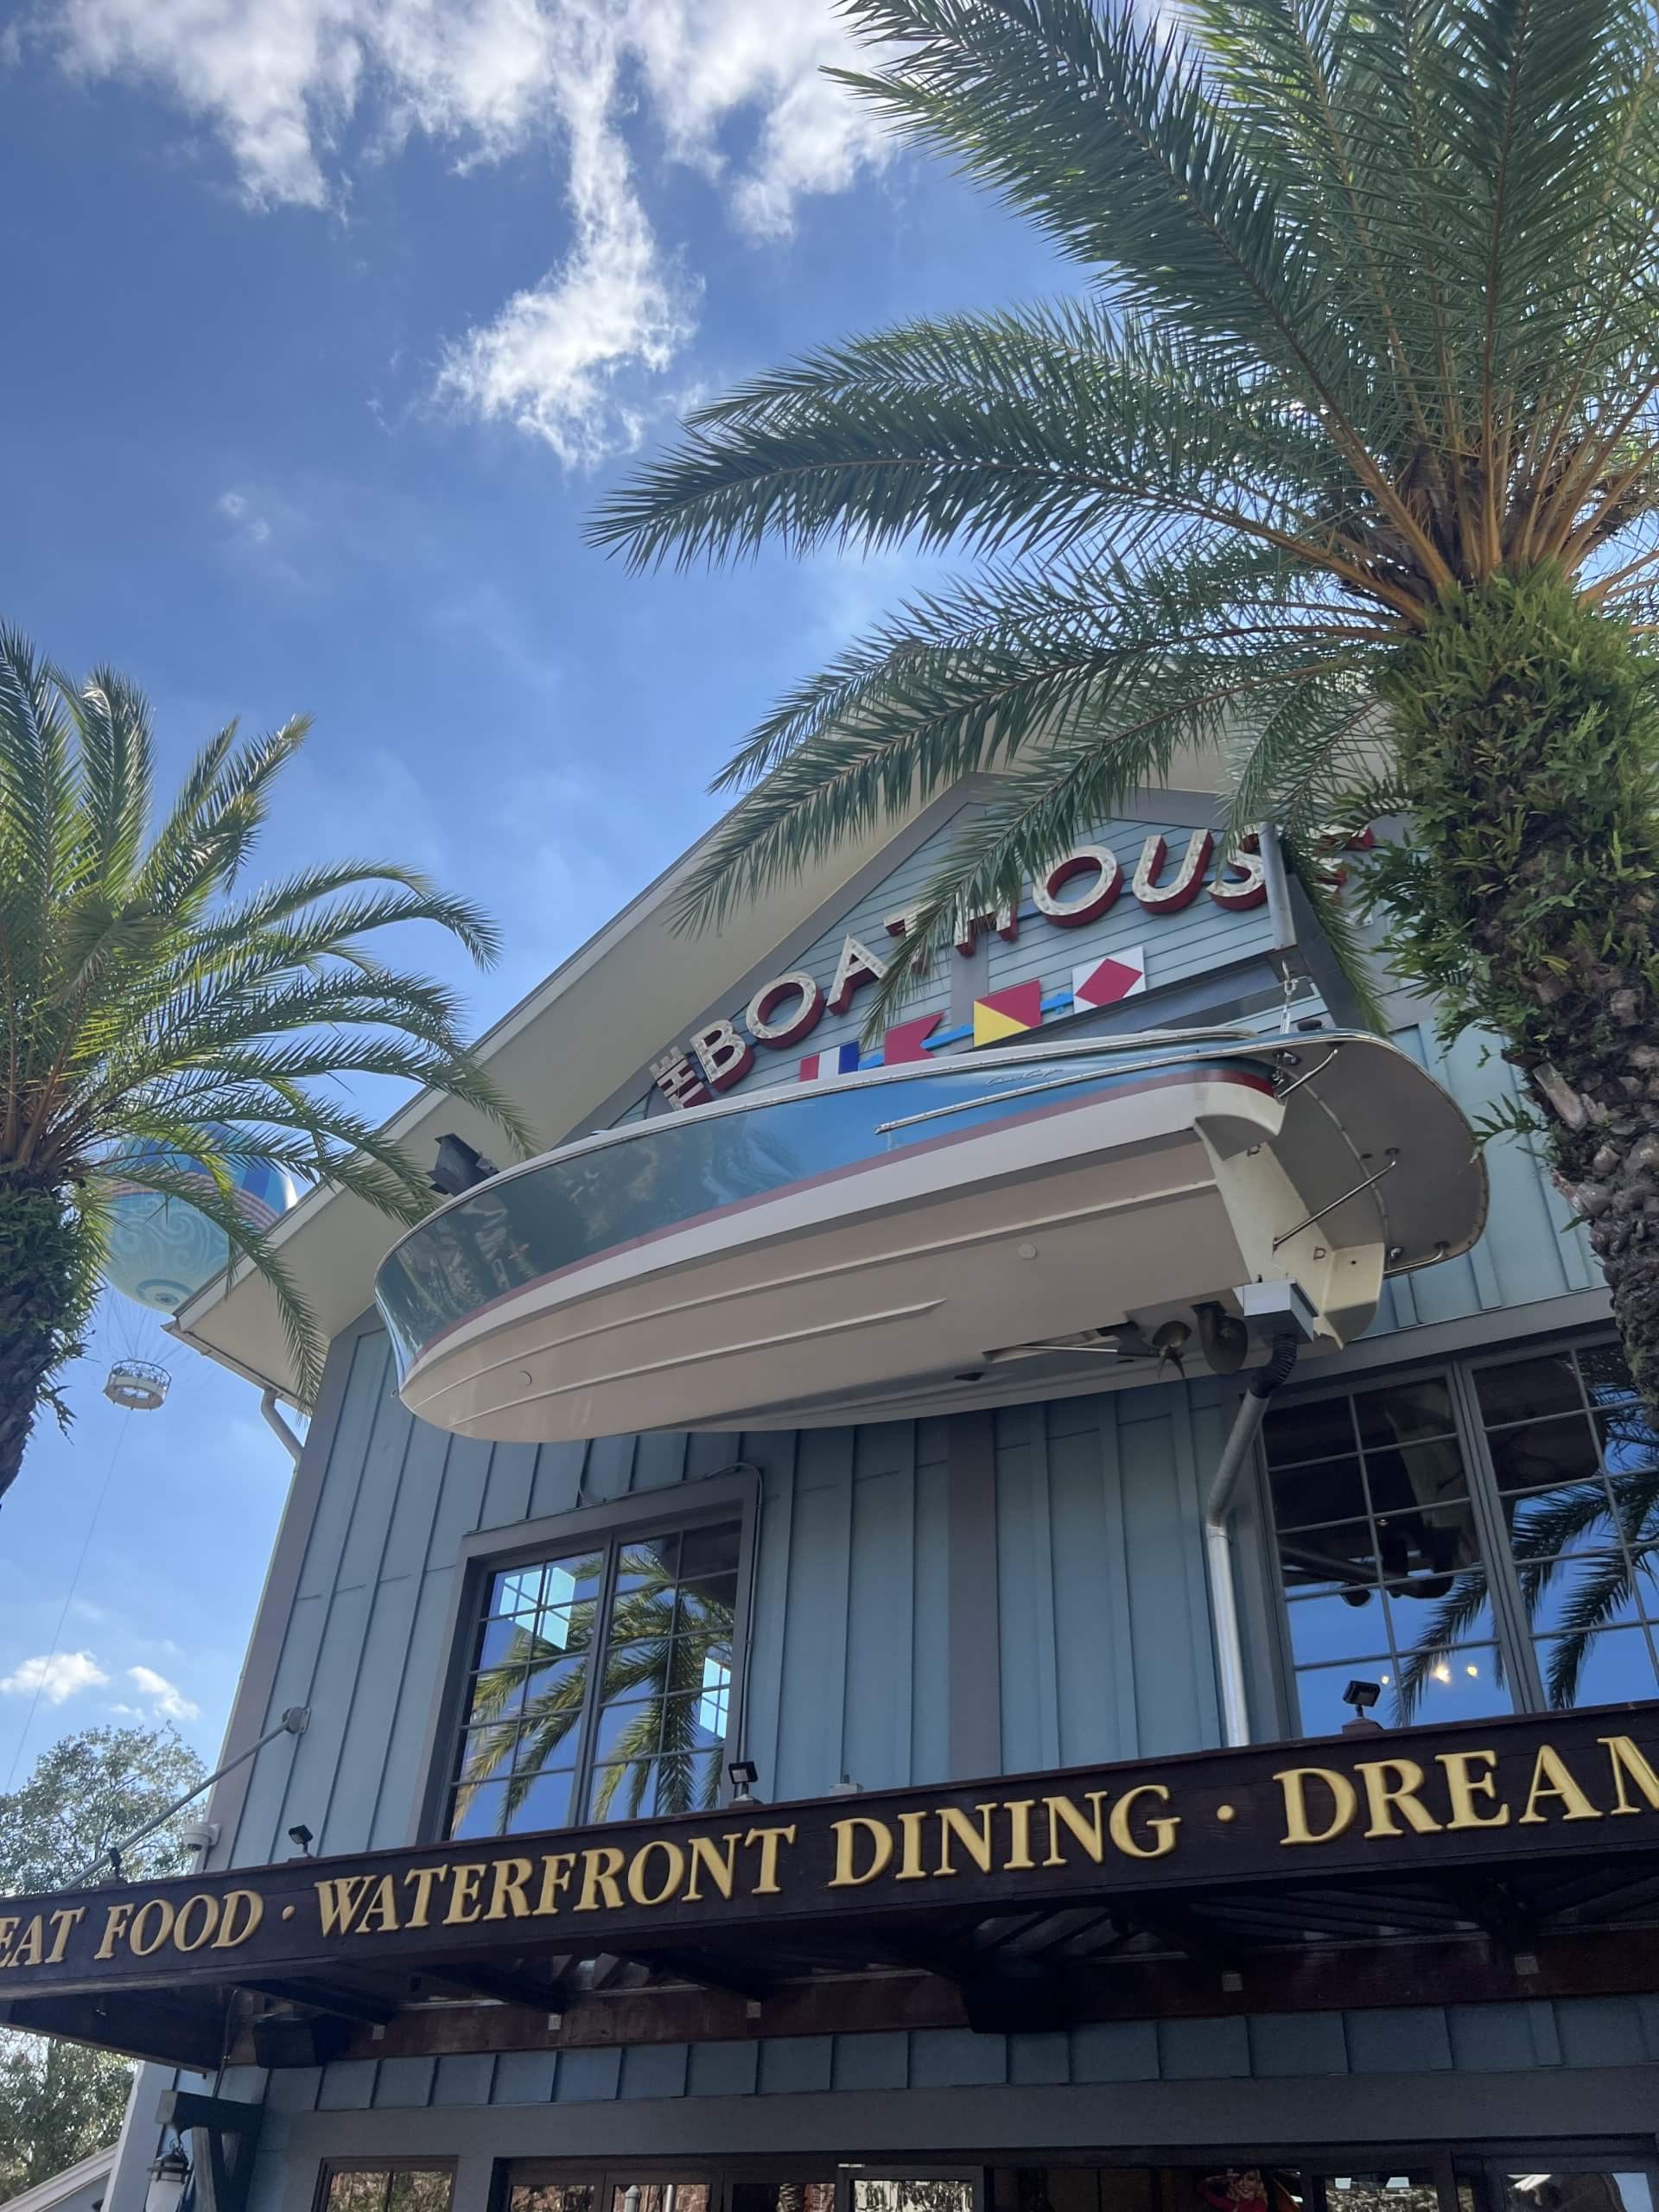 Tips and Tricks for the best trip to Walt Disney World Orlando